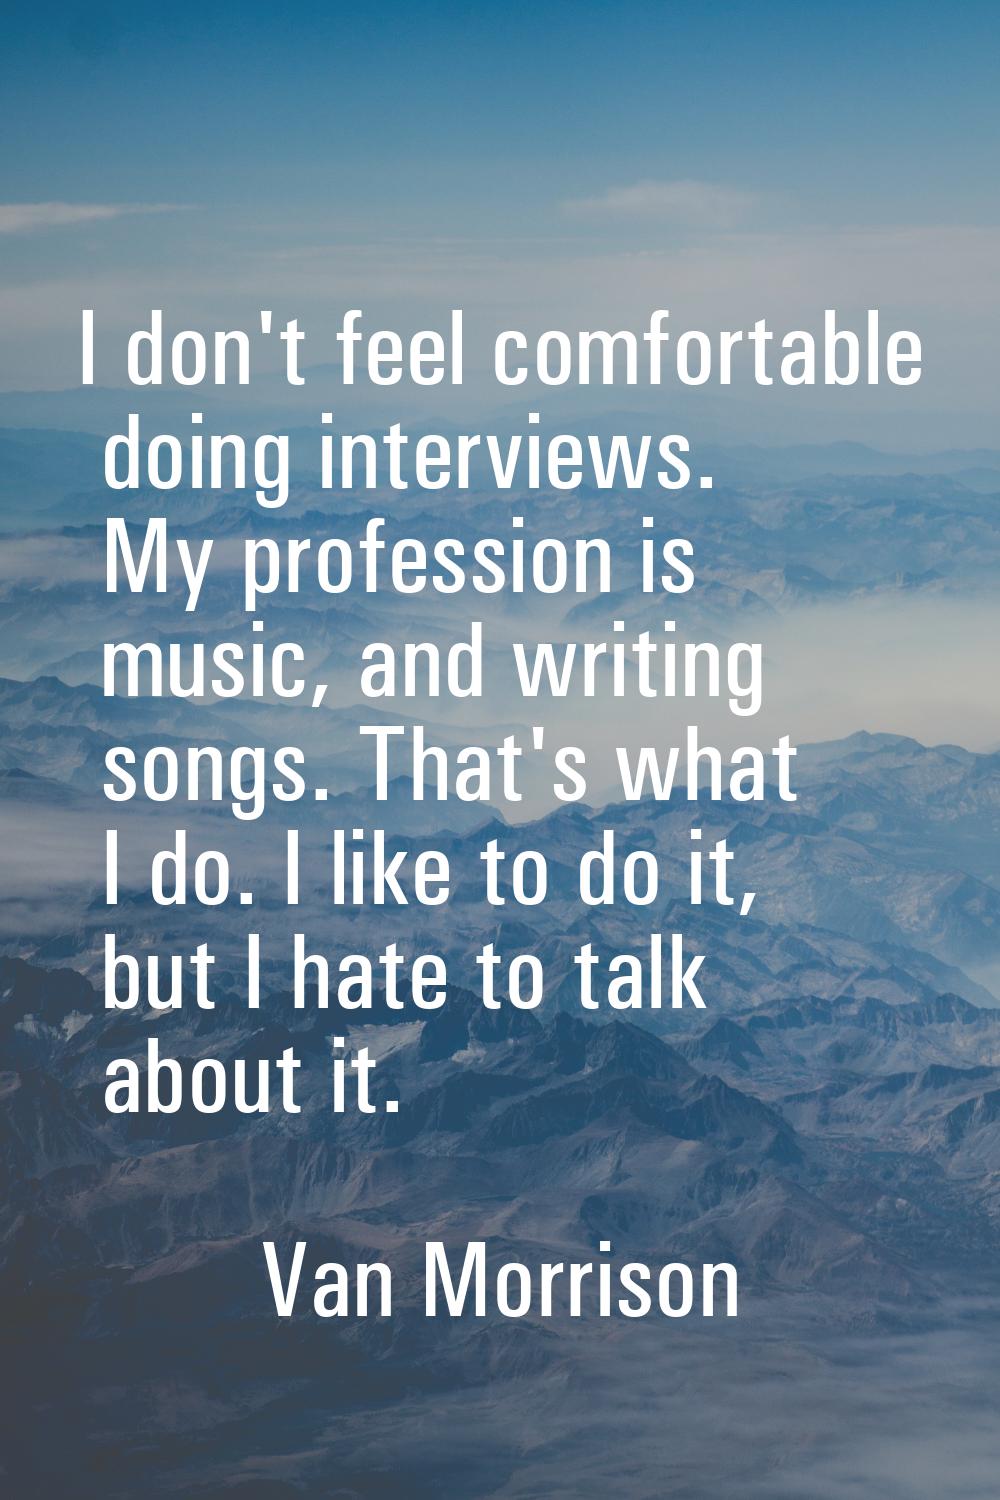 I don't feel comfortable doing interviews. My profession is music, and writing songs. That's what I